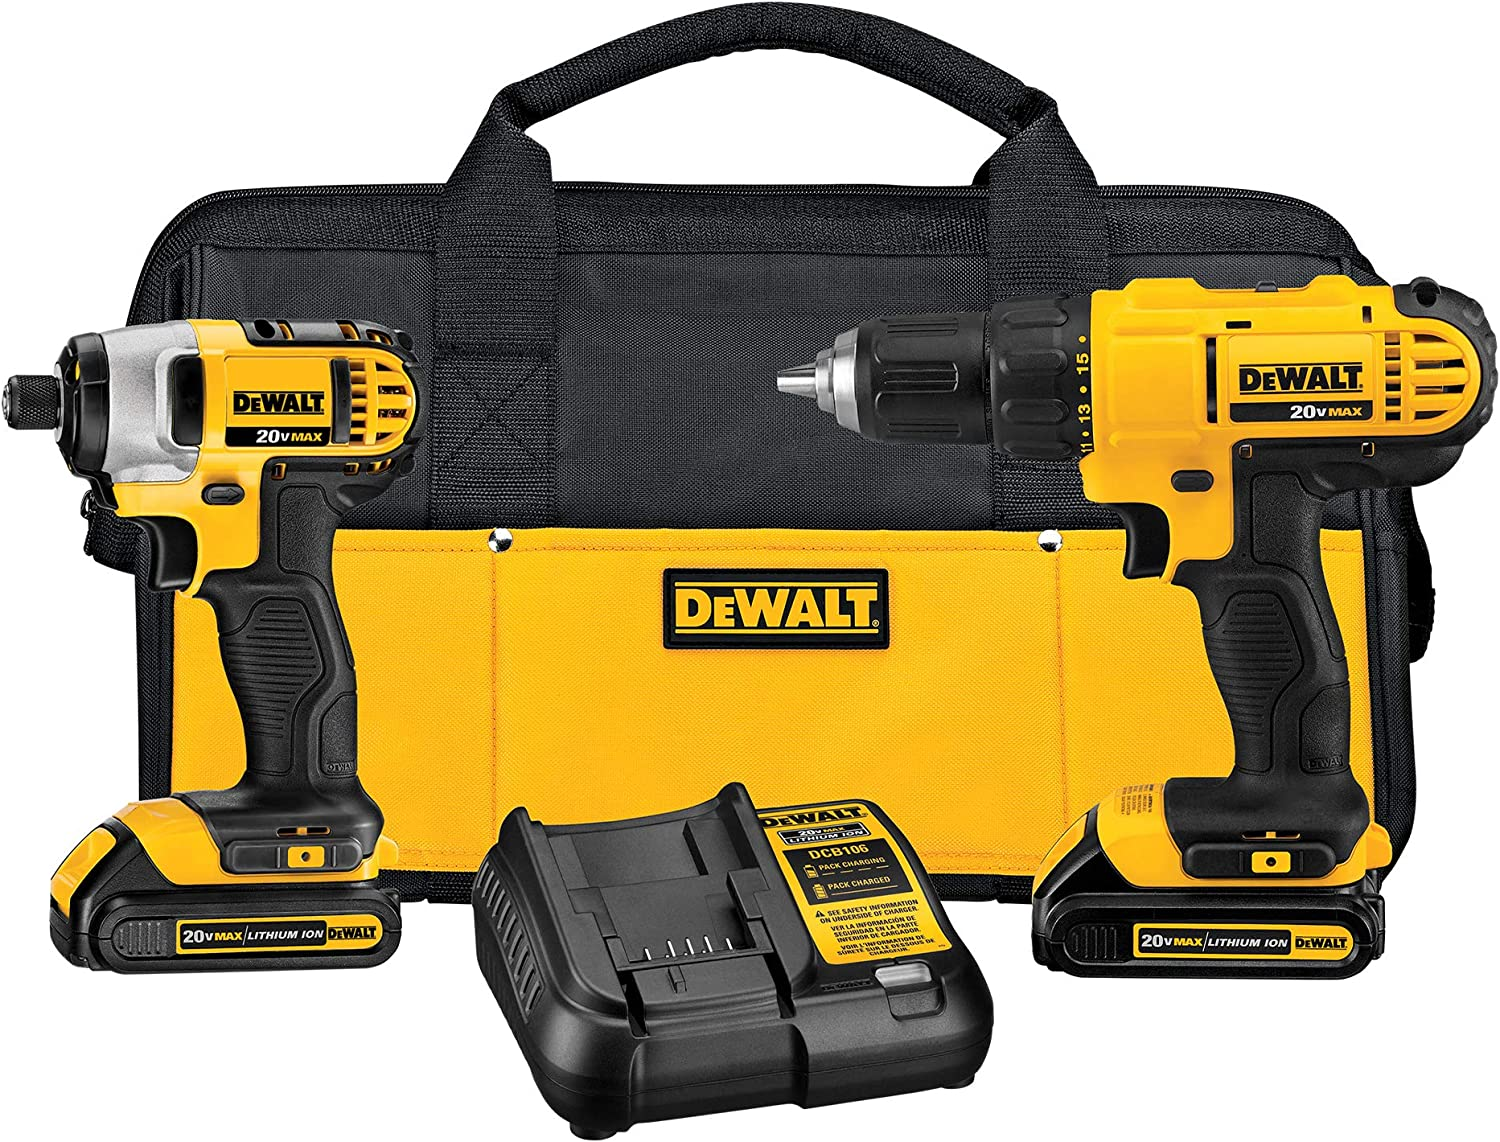 Dewalt drill/impact with 2 batteries for diy $159